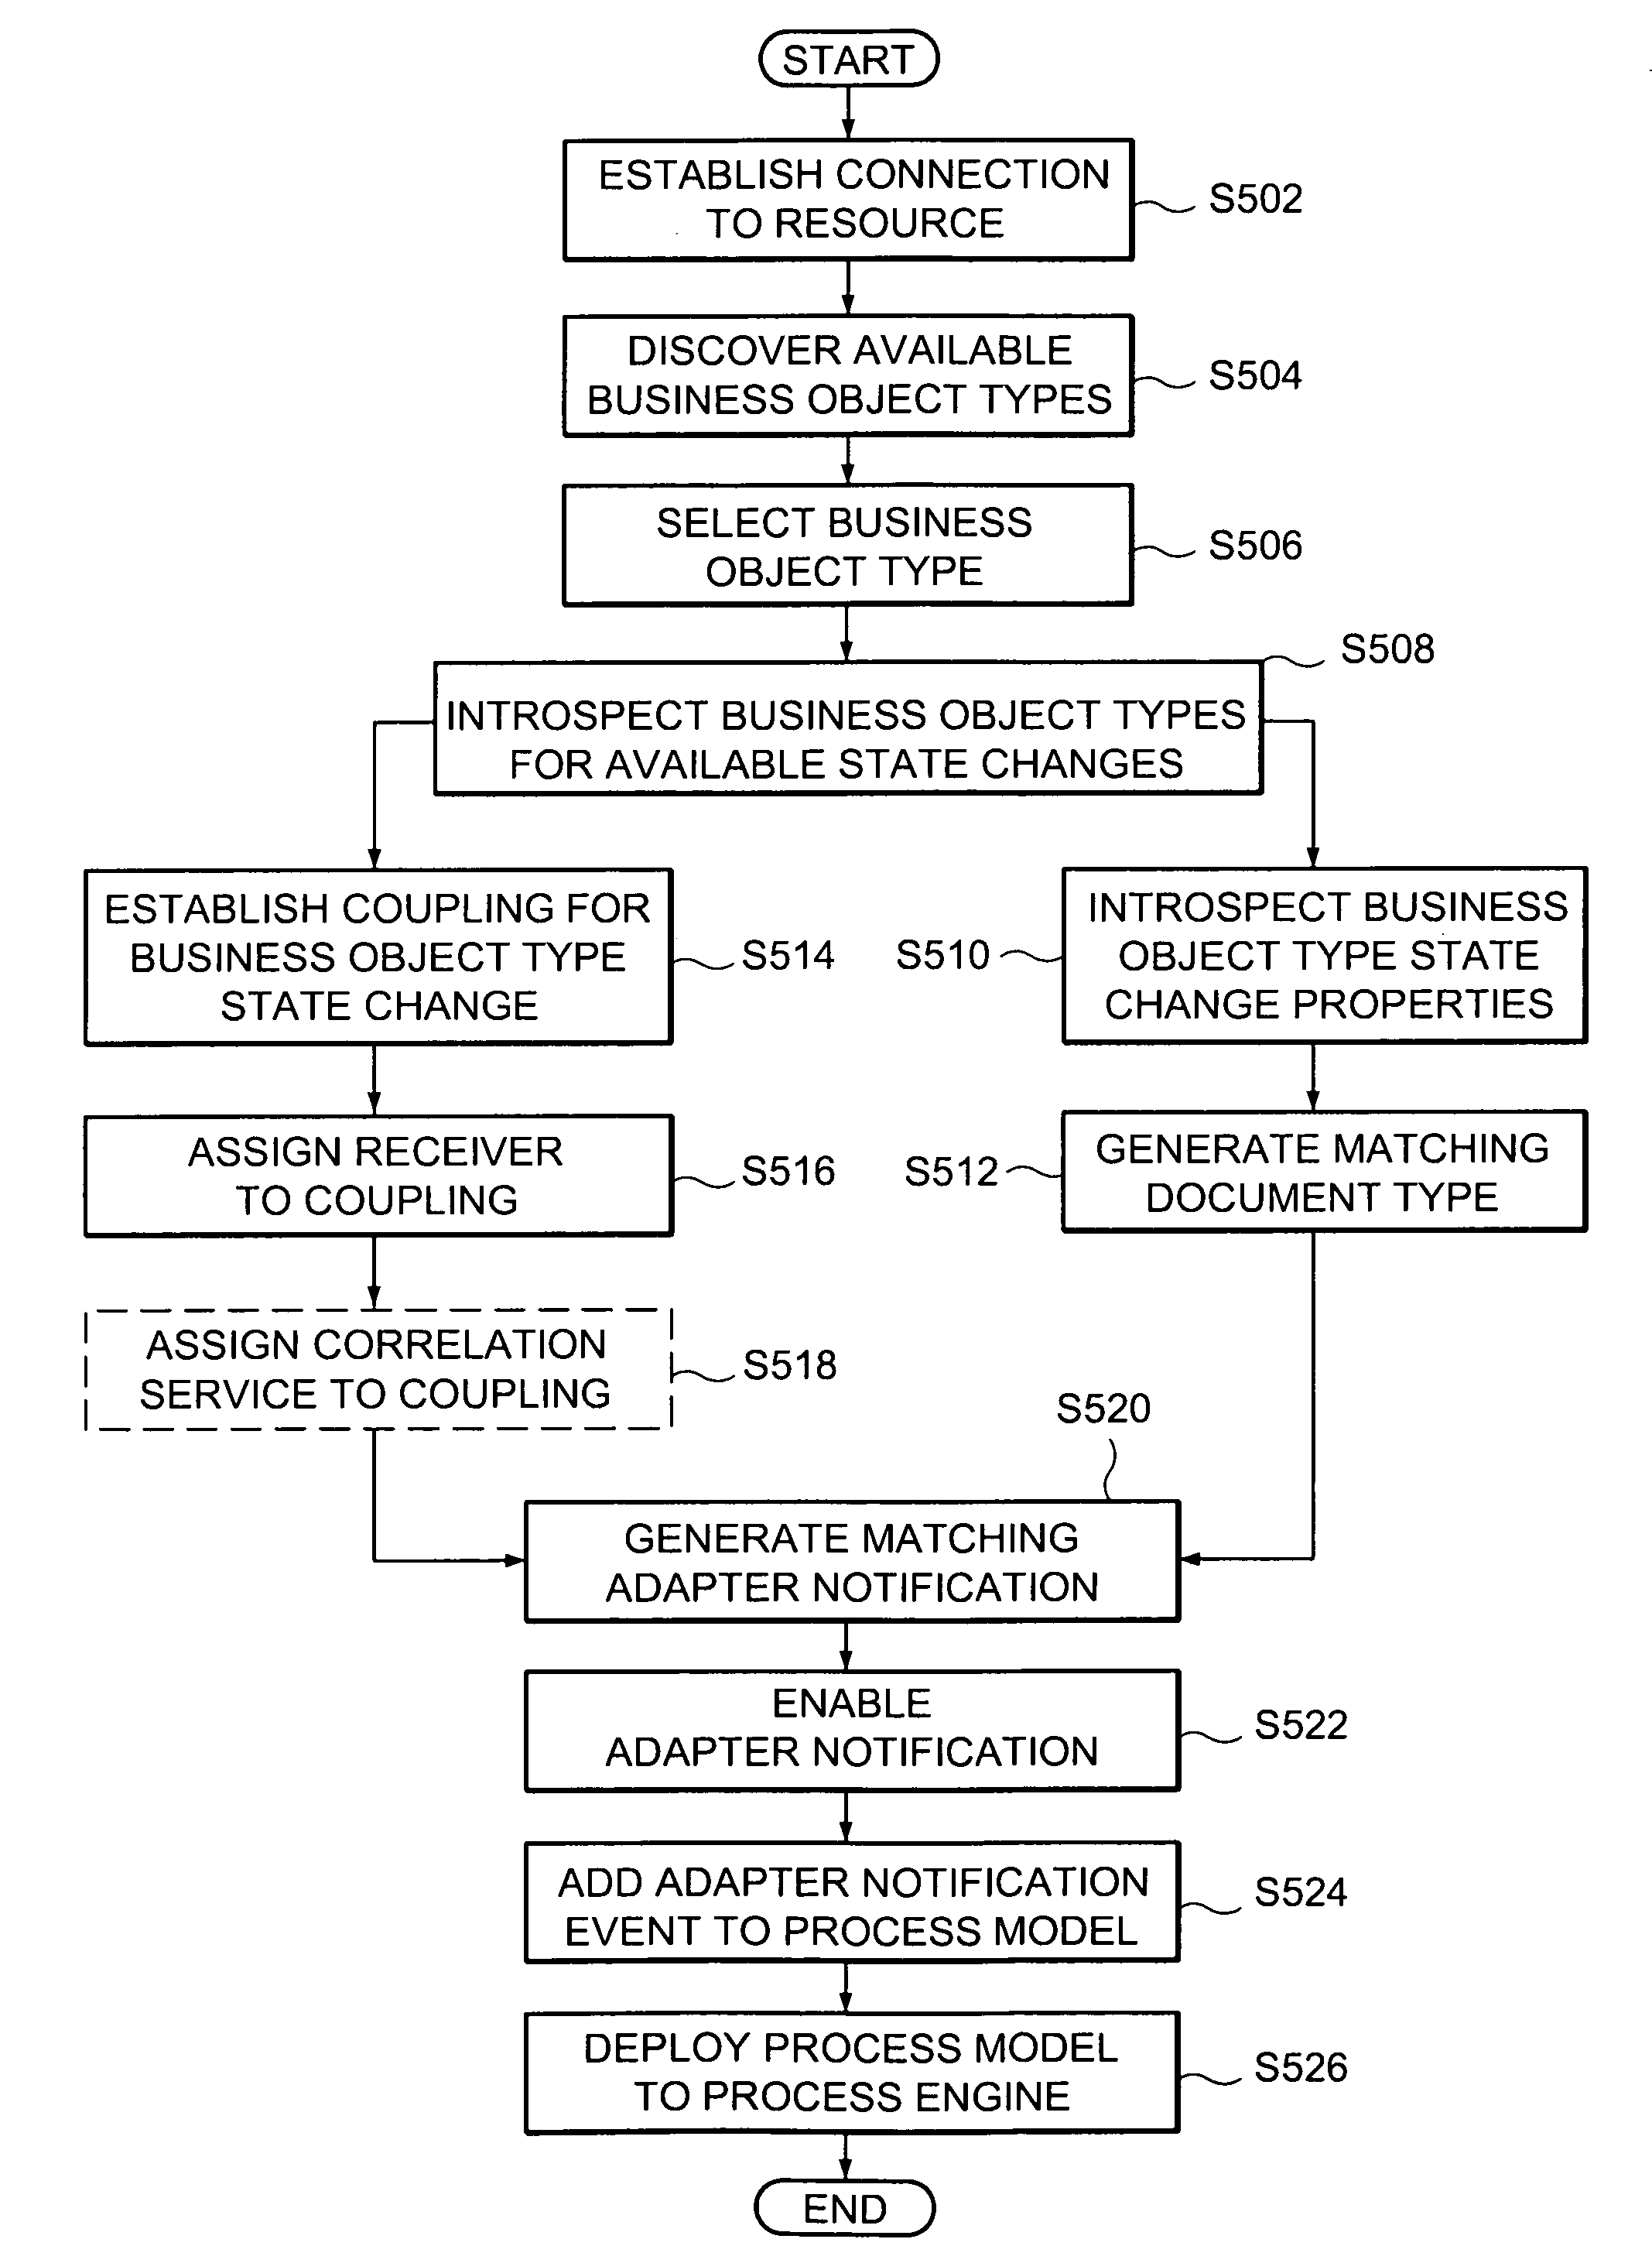 Systems and/or methods for end-to-end business process management, business event management, and/or business activity monitoring